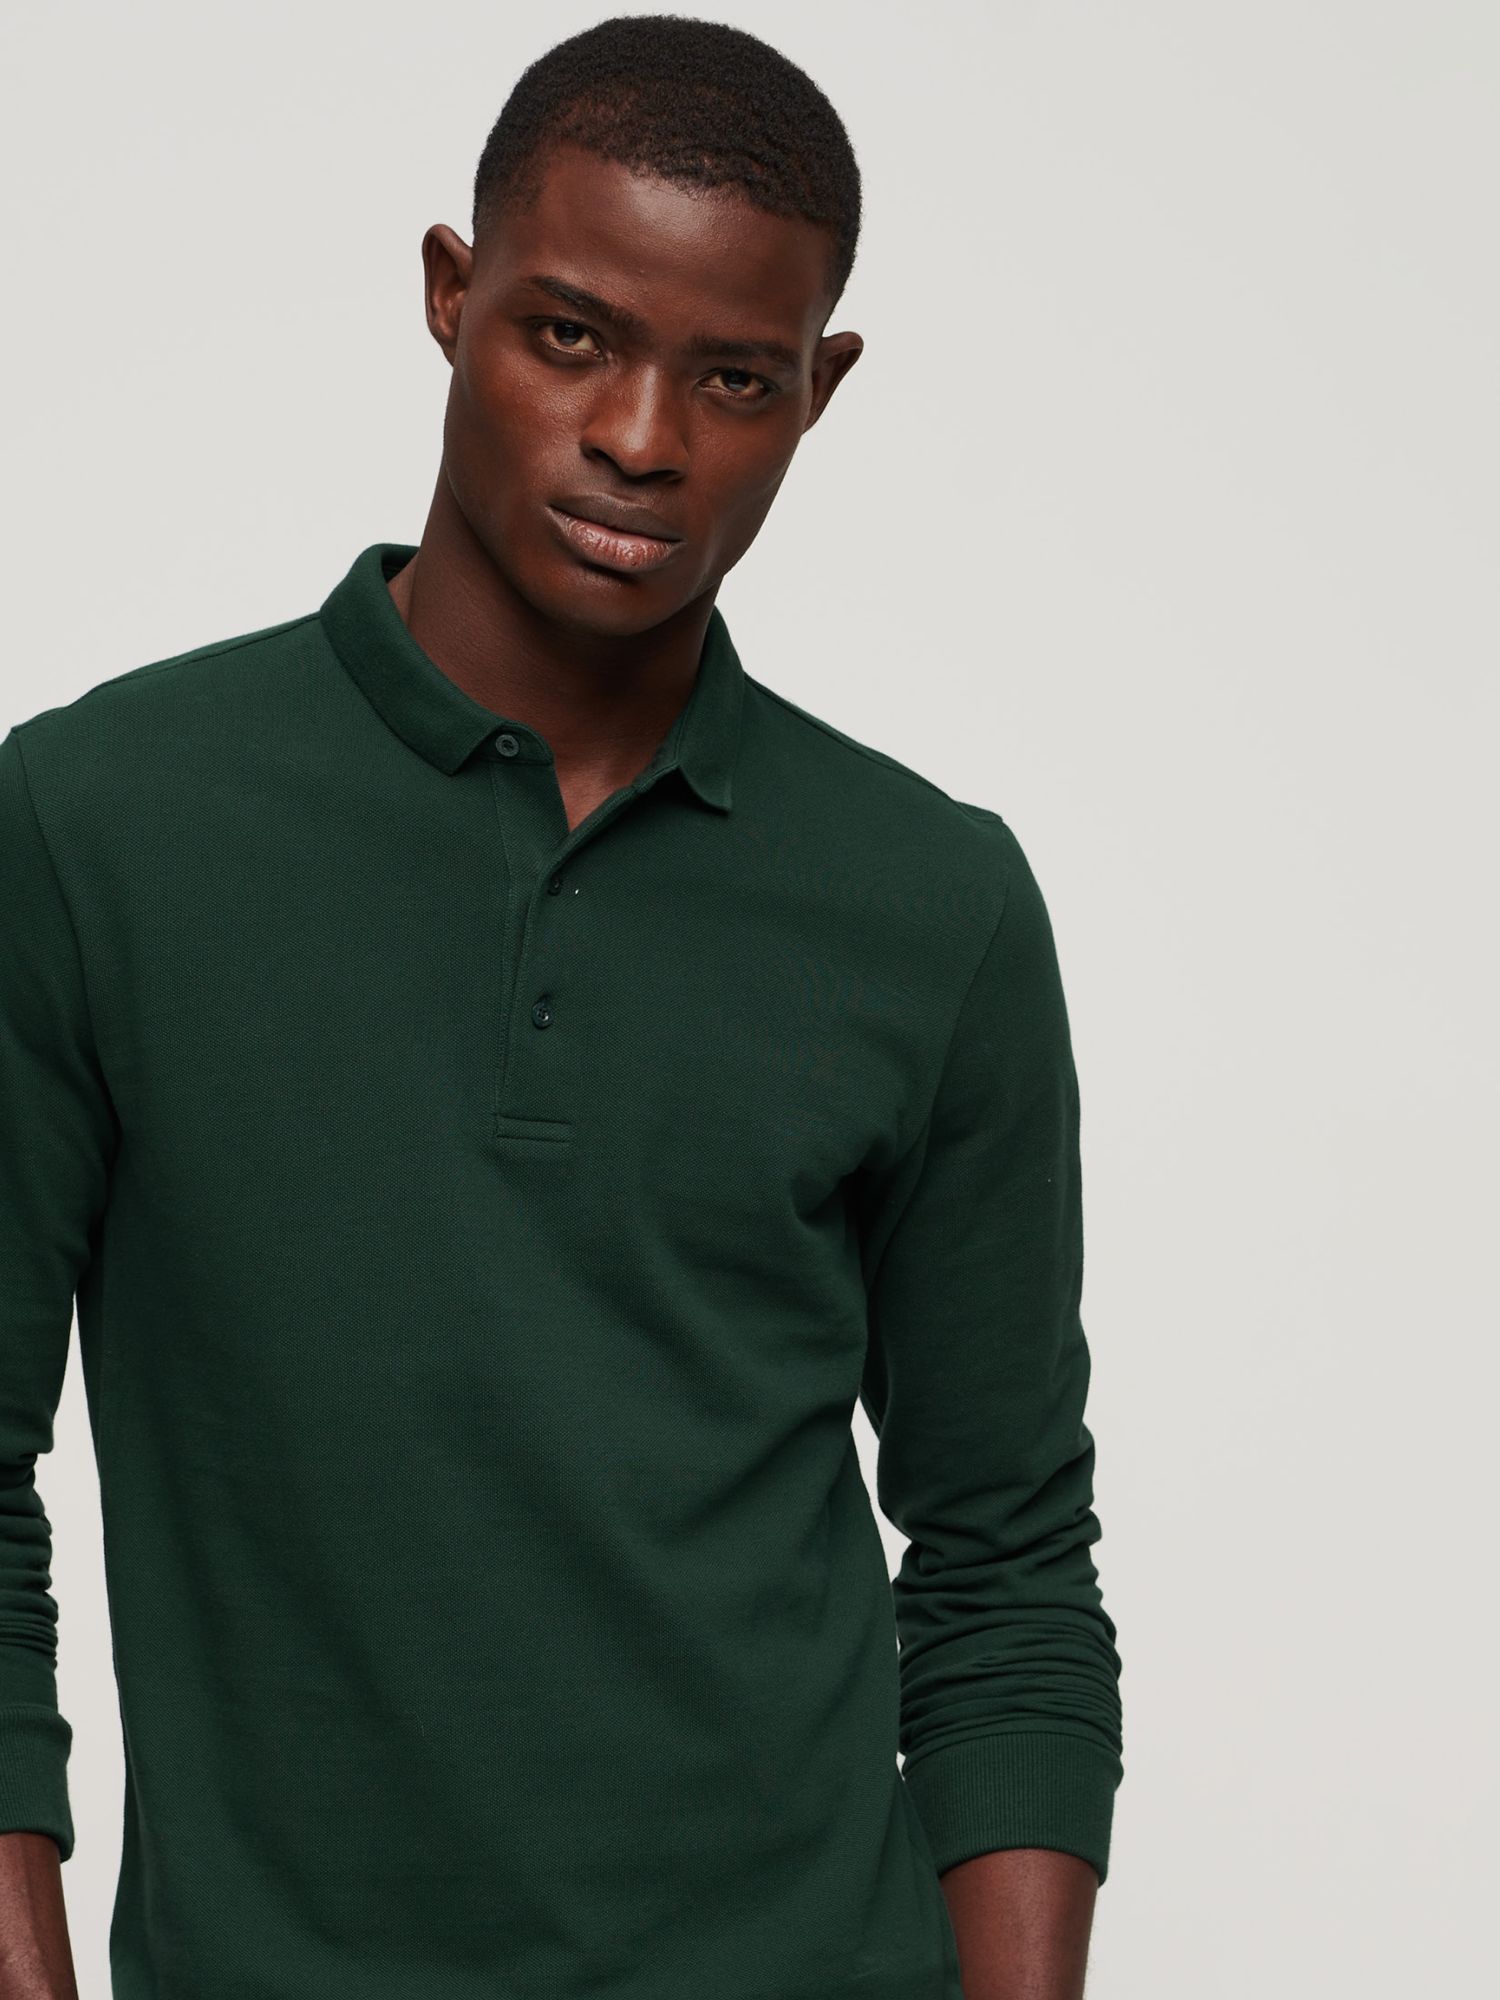 Superdry Long Sleeve Cotton Pique Polo Shirt, Forest Green, M